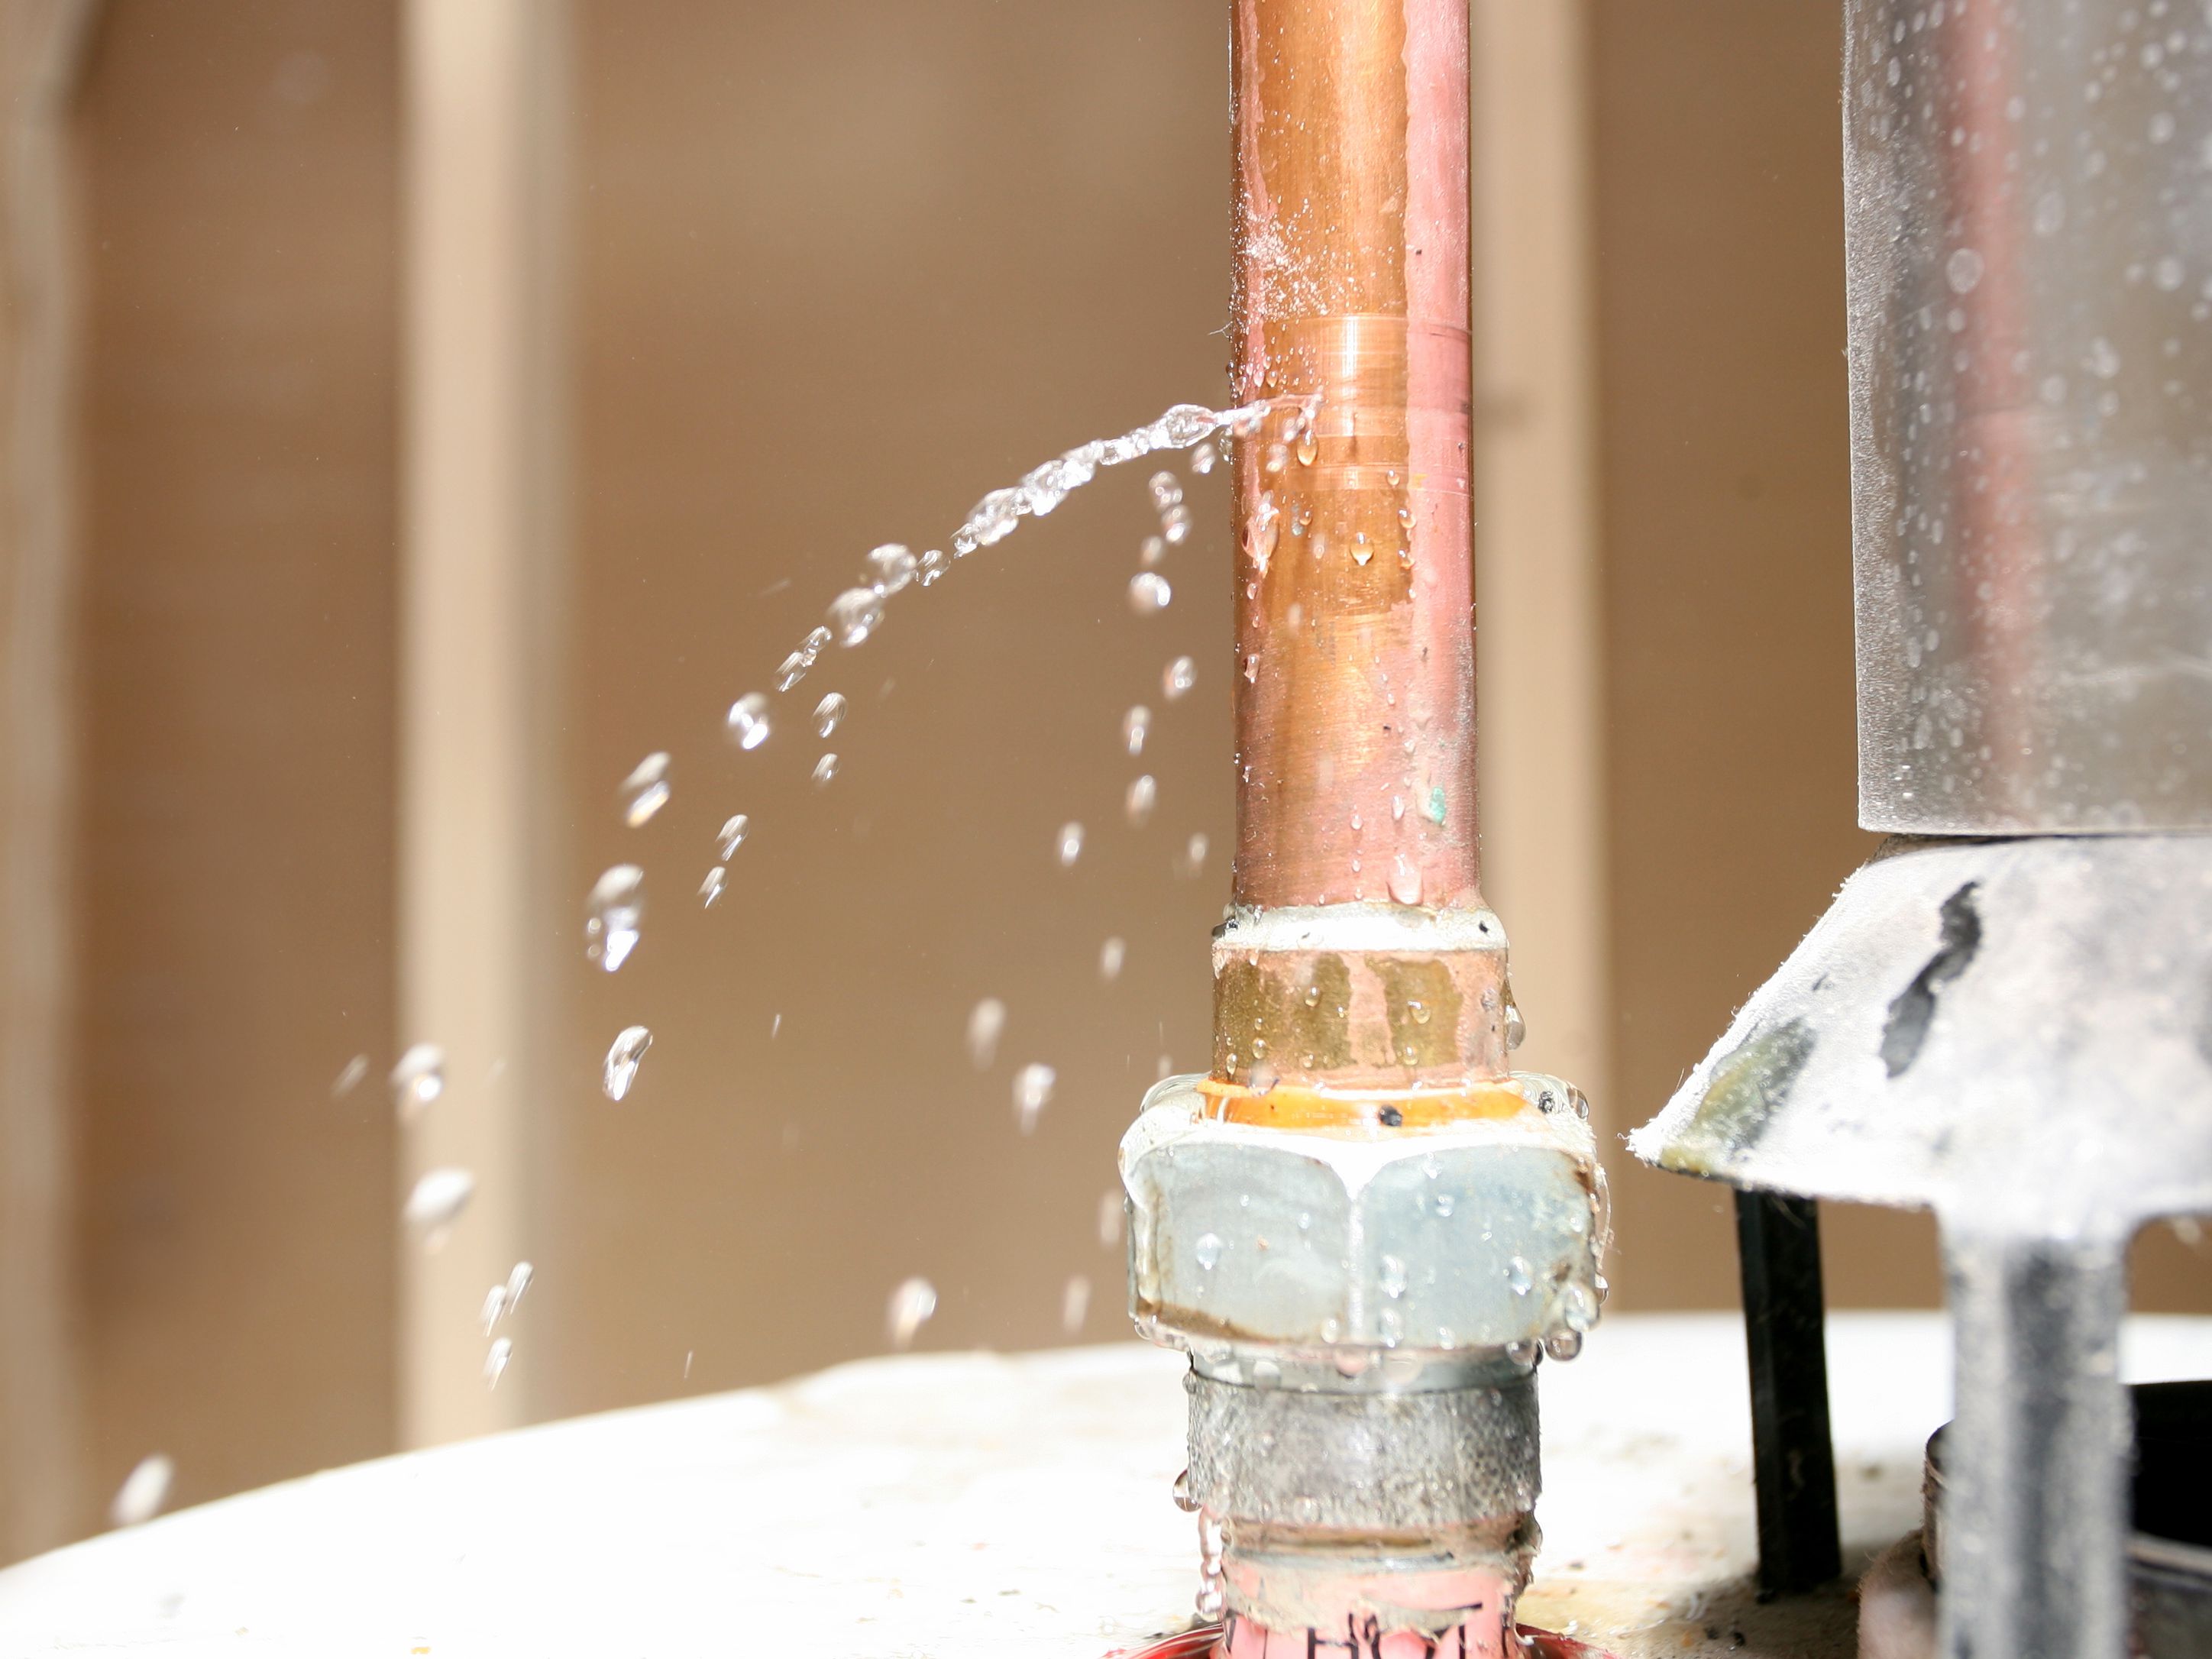 How To Fix A Leaking Water Heater